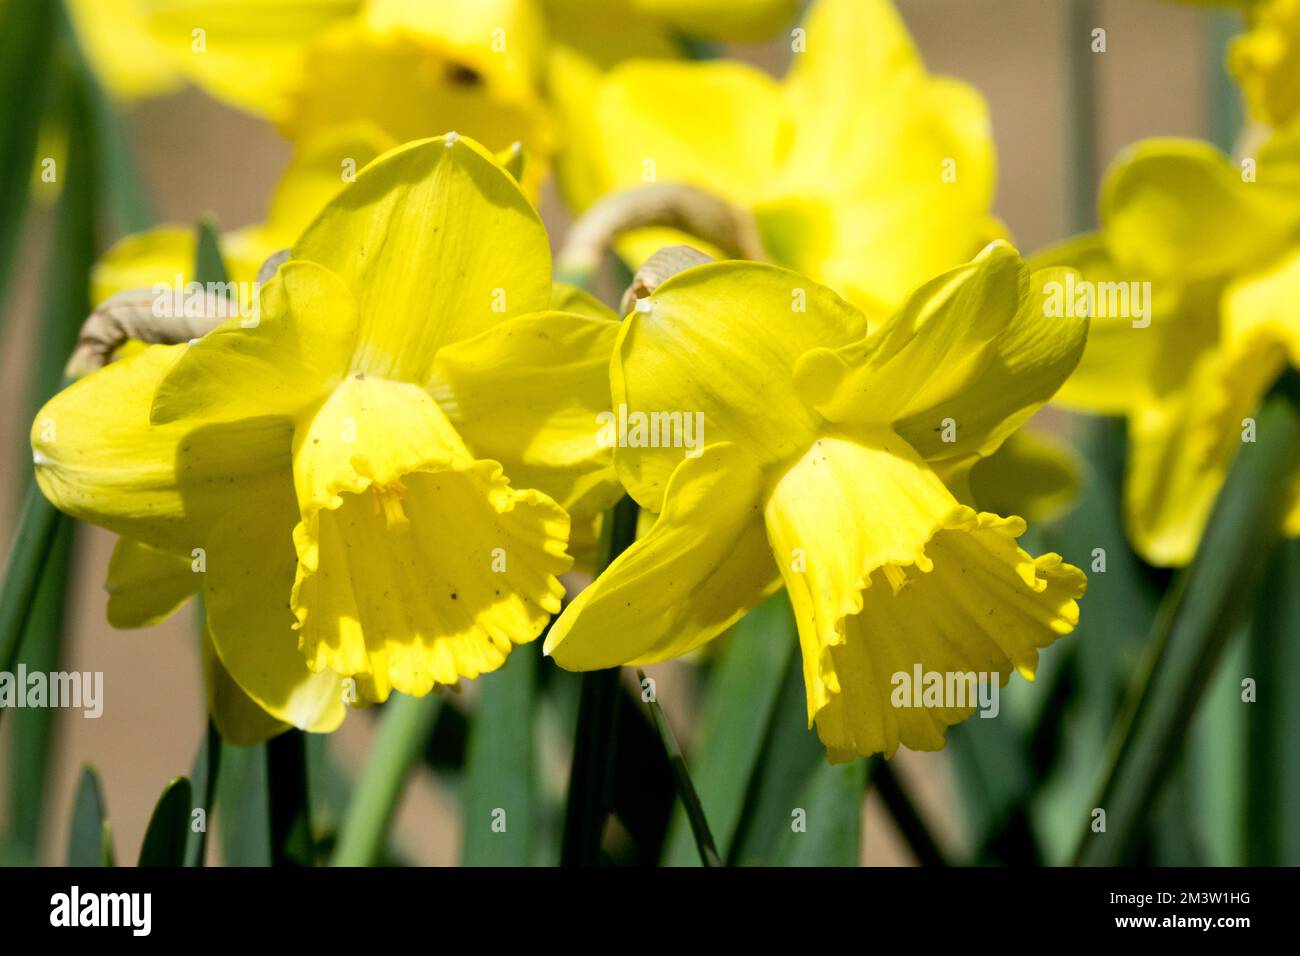 Daffodils Narcissus 'Daydream', Spring, Yellow daffodil, Trumpet Daffodil, Vibrant Flowers in the garden Stock Photo